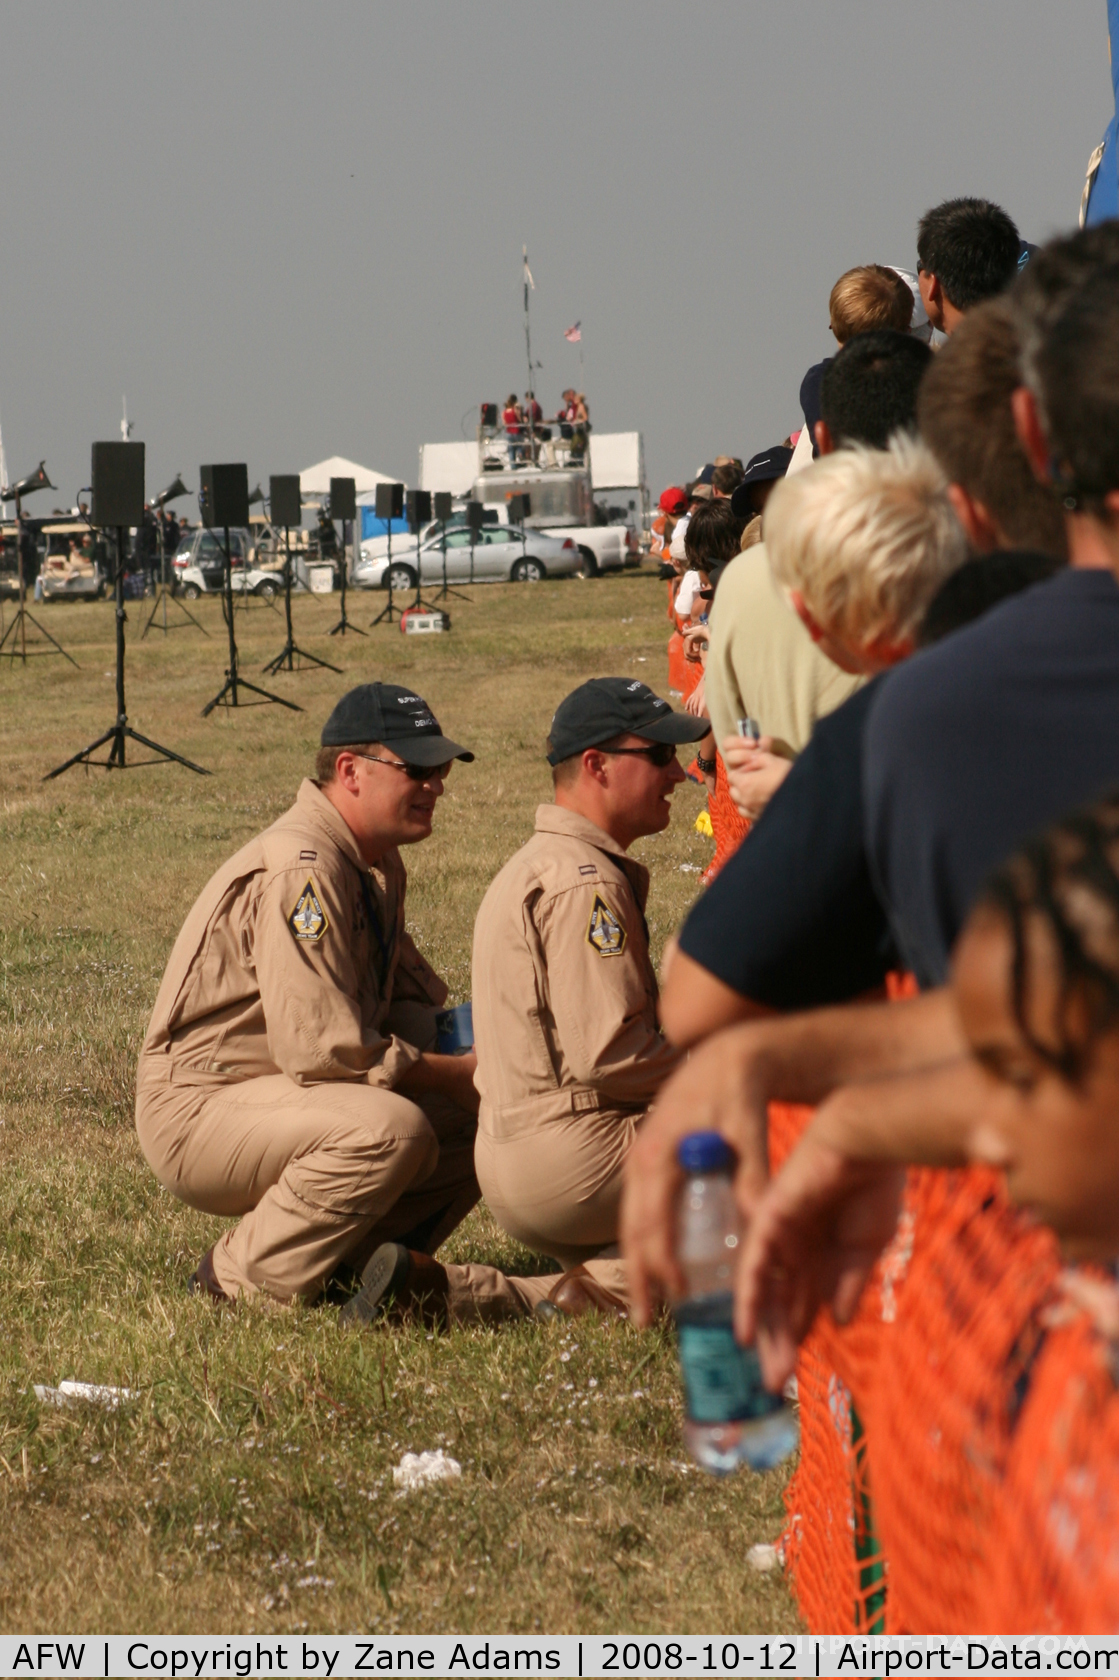 Fort Worth Alliance Airport (AFW) - Alliance Airshow 2008 - Super Hornet Demo crew, LBJ and Radio, working the crowd line. 